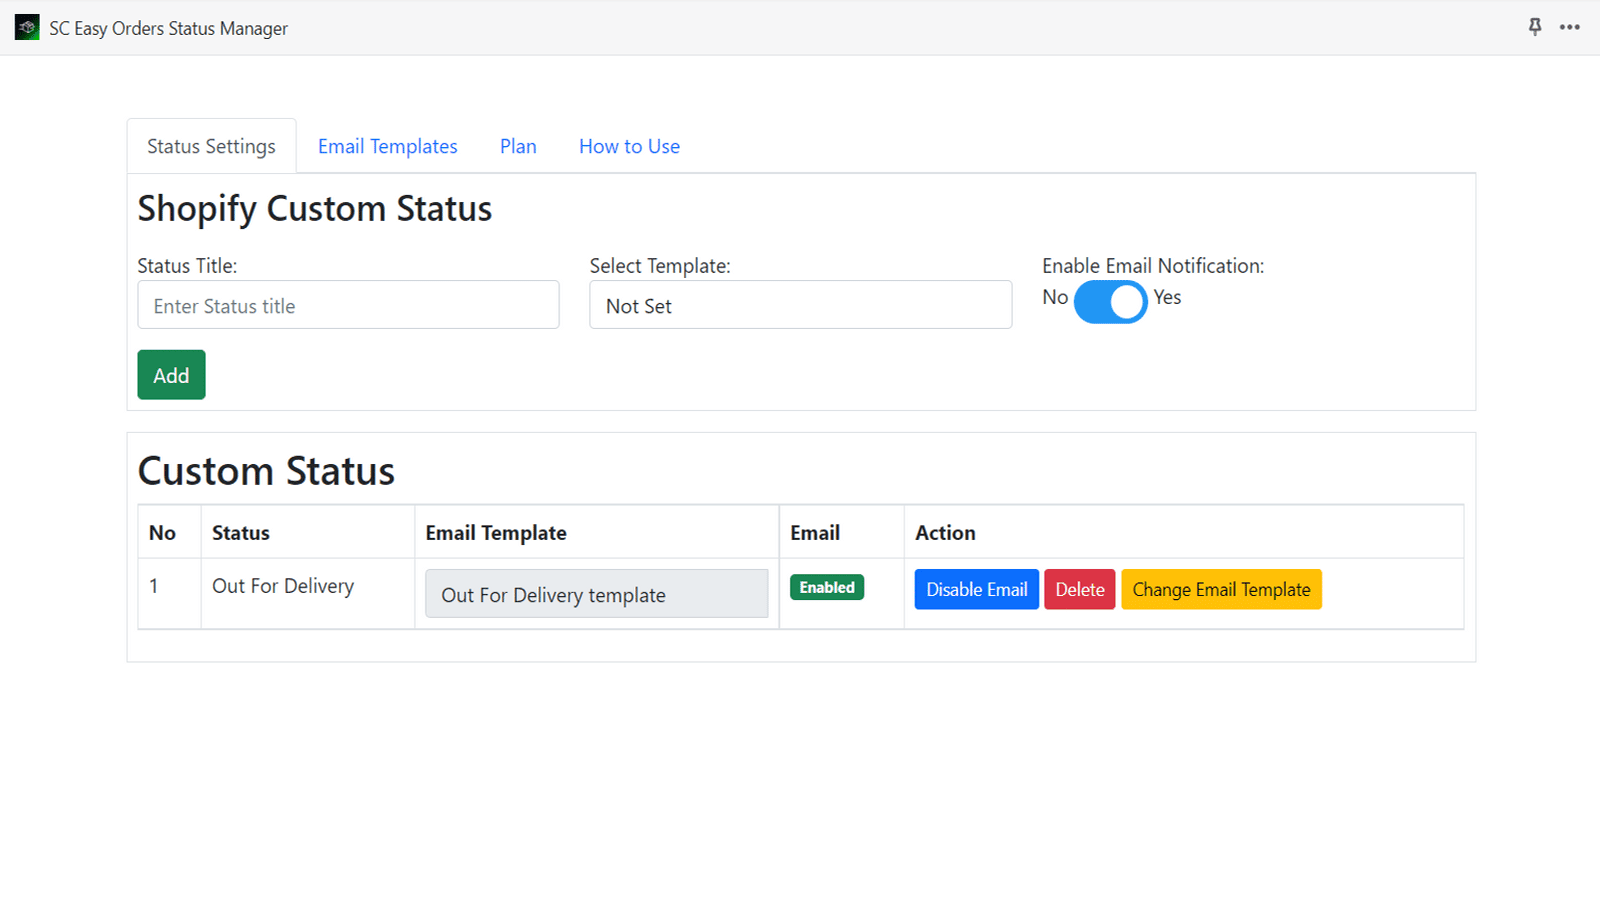 SC Easy Orders Status Manager